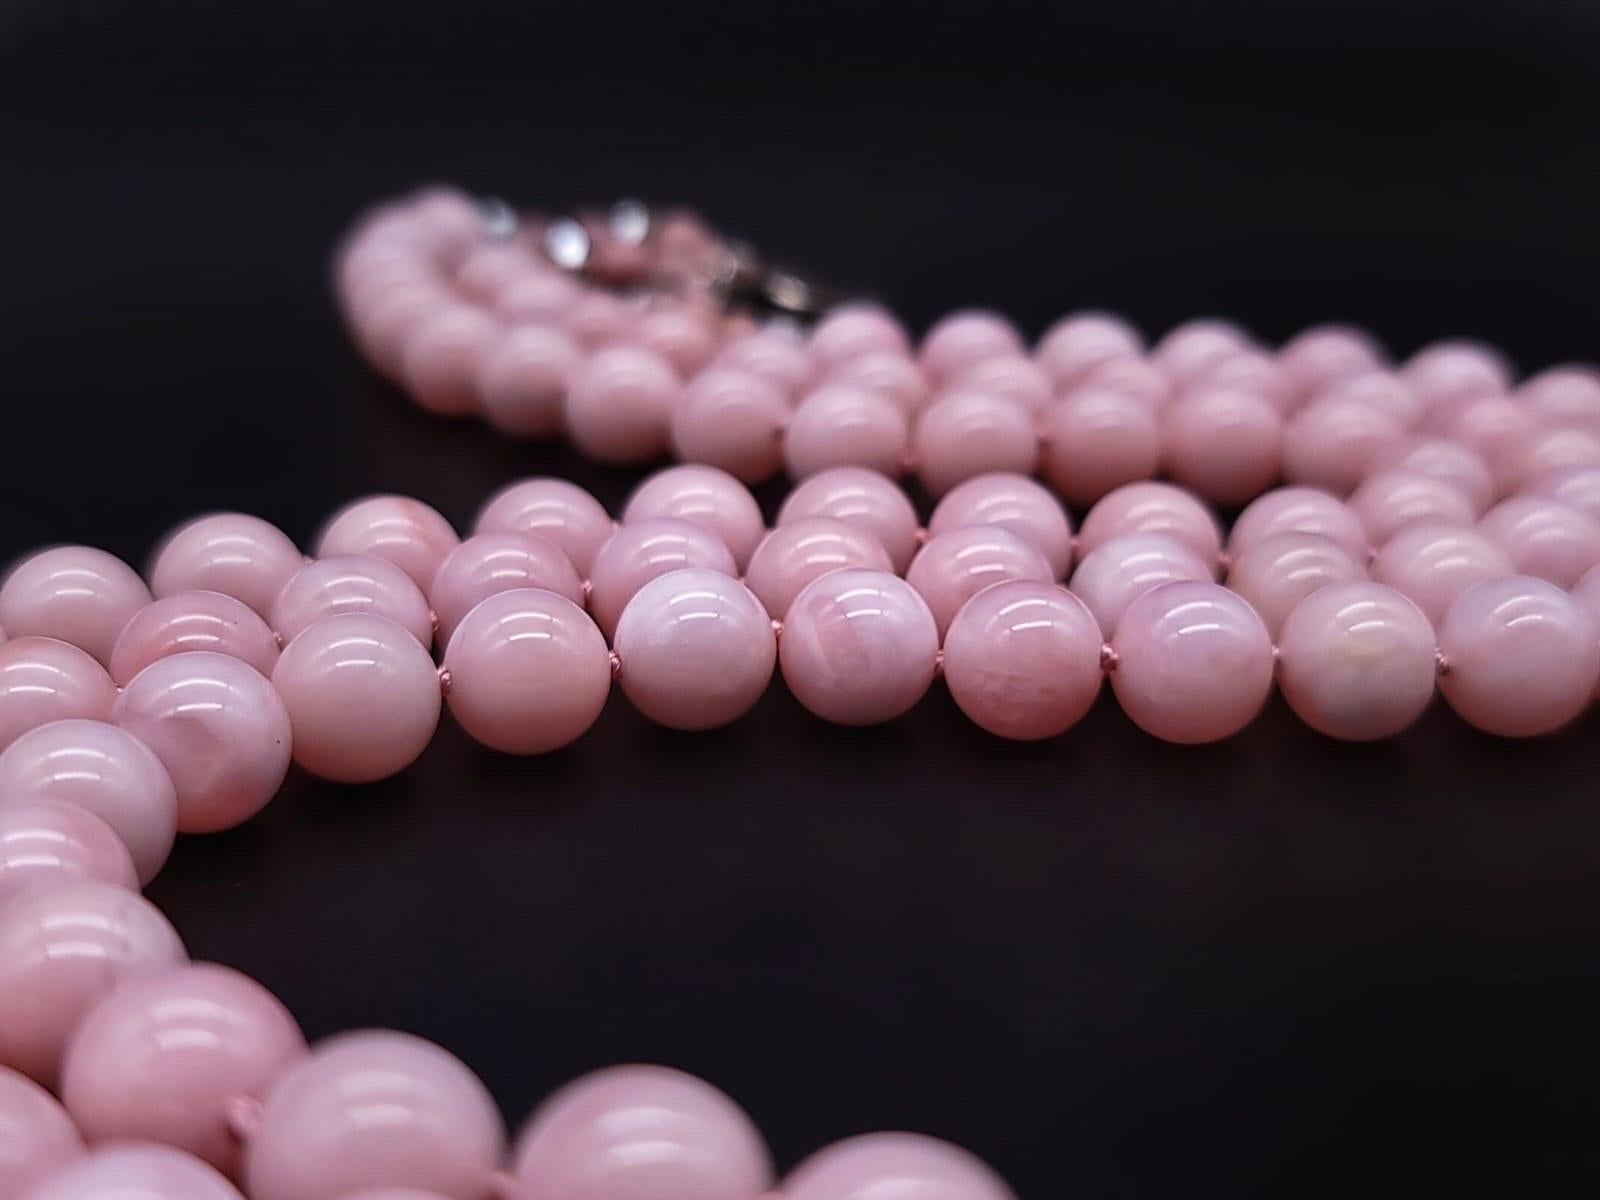 One-of-a-Kind

3 strands of matched 10 m.m beads, each strand just kissing the next are caught together with a signature closure of 6 m.m Pink Peruvian Opals,Pink Swarovski crystal and a clasp of Venetian glass set in sterling silver.

Pink Opal is